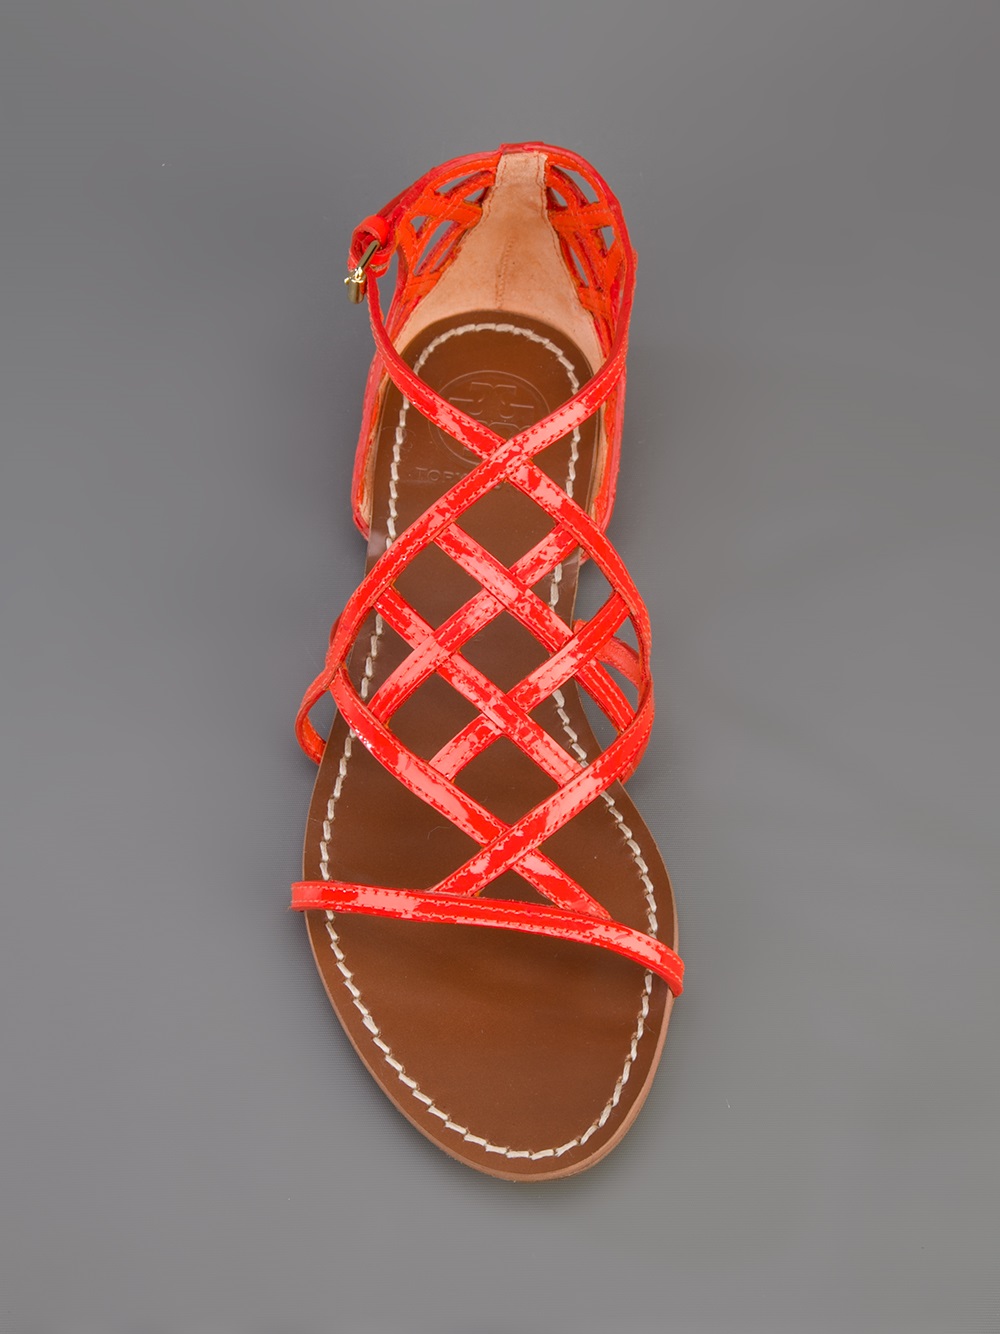 Tory Burch Strappy Flat Sandal in Red - Lyst